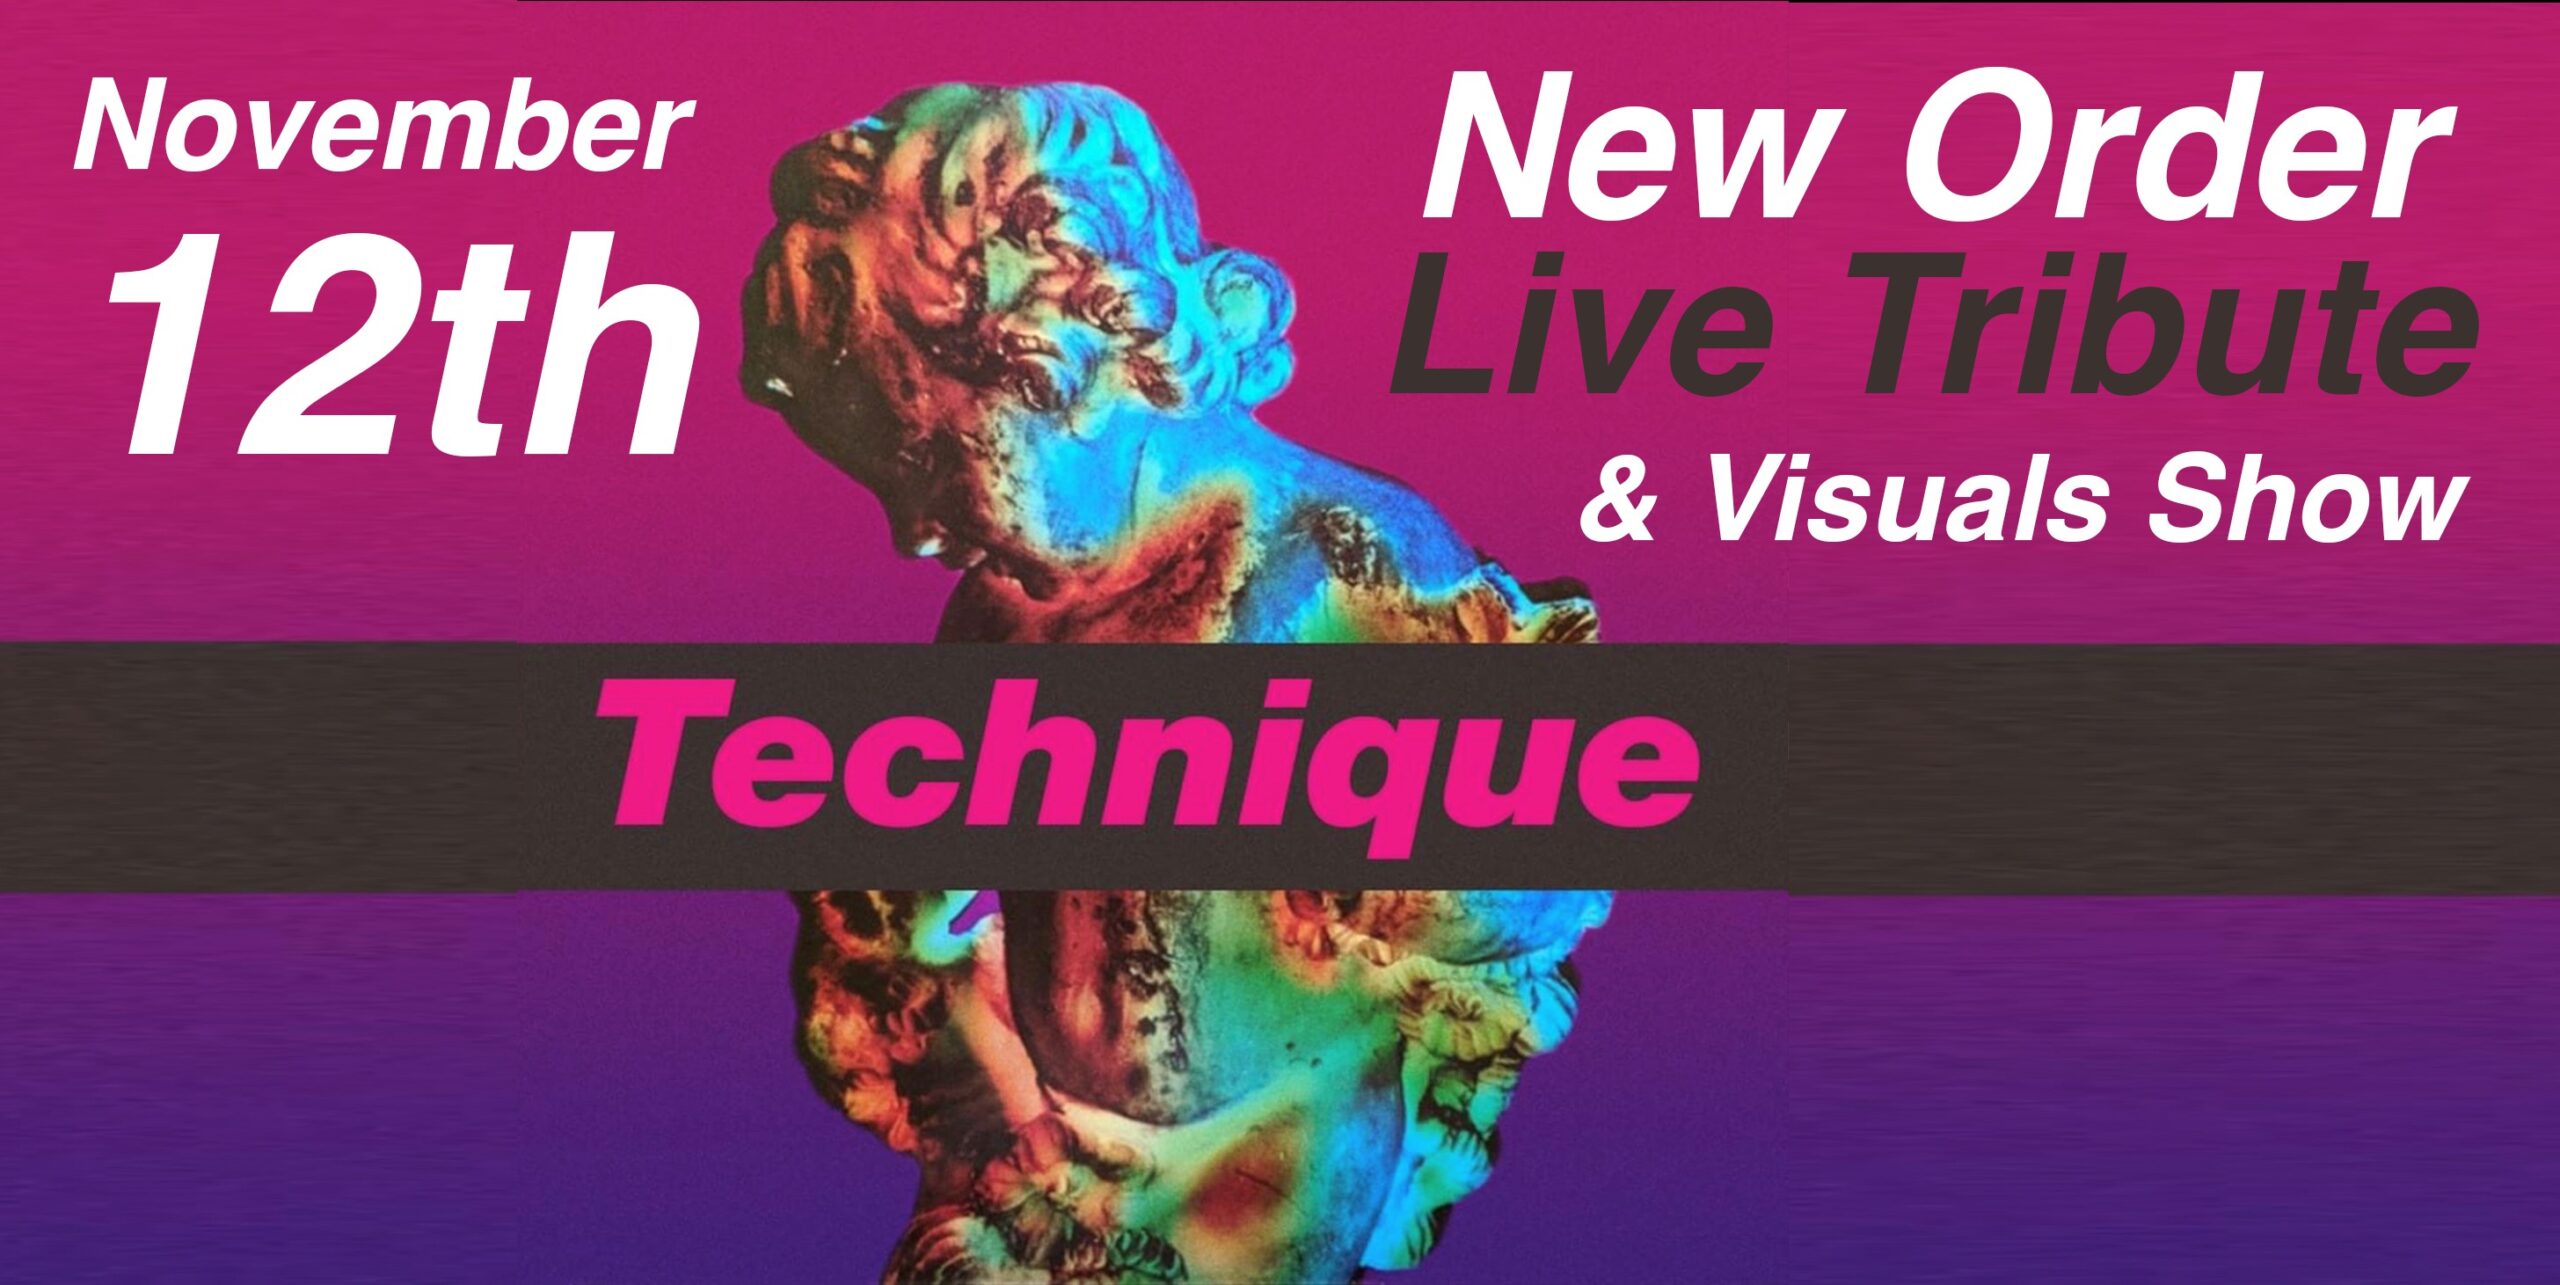 You are currently viewing The ultimate New Order Live Tribute Show by Technique